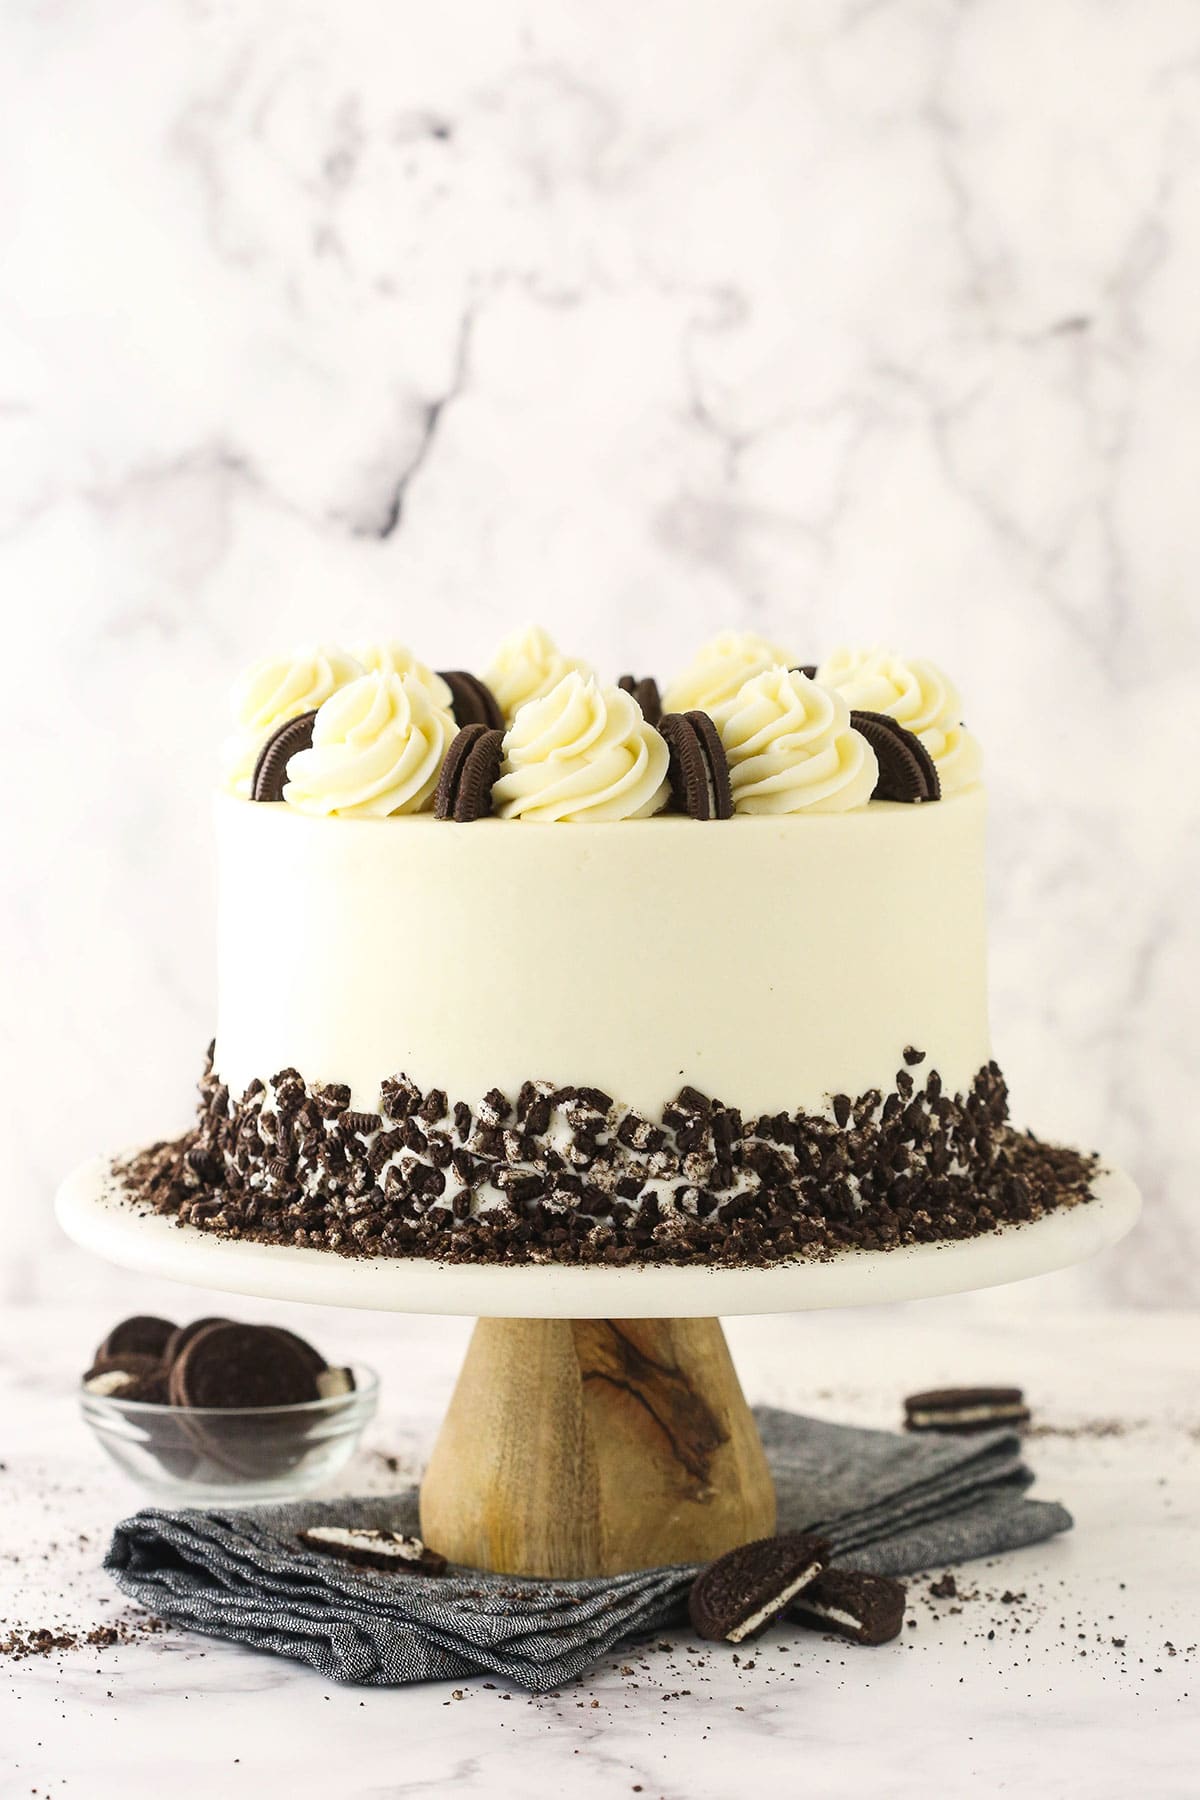 A smoothly frosted and beautifully decorated cookies and cream cake on top of a cake stand with Oreo cookies underneath it